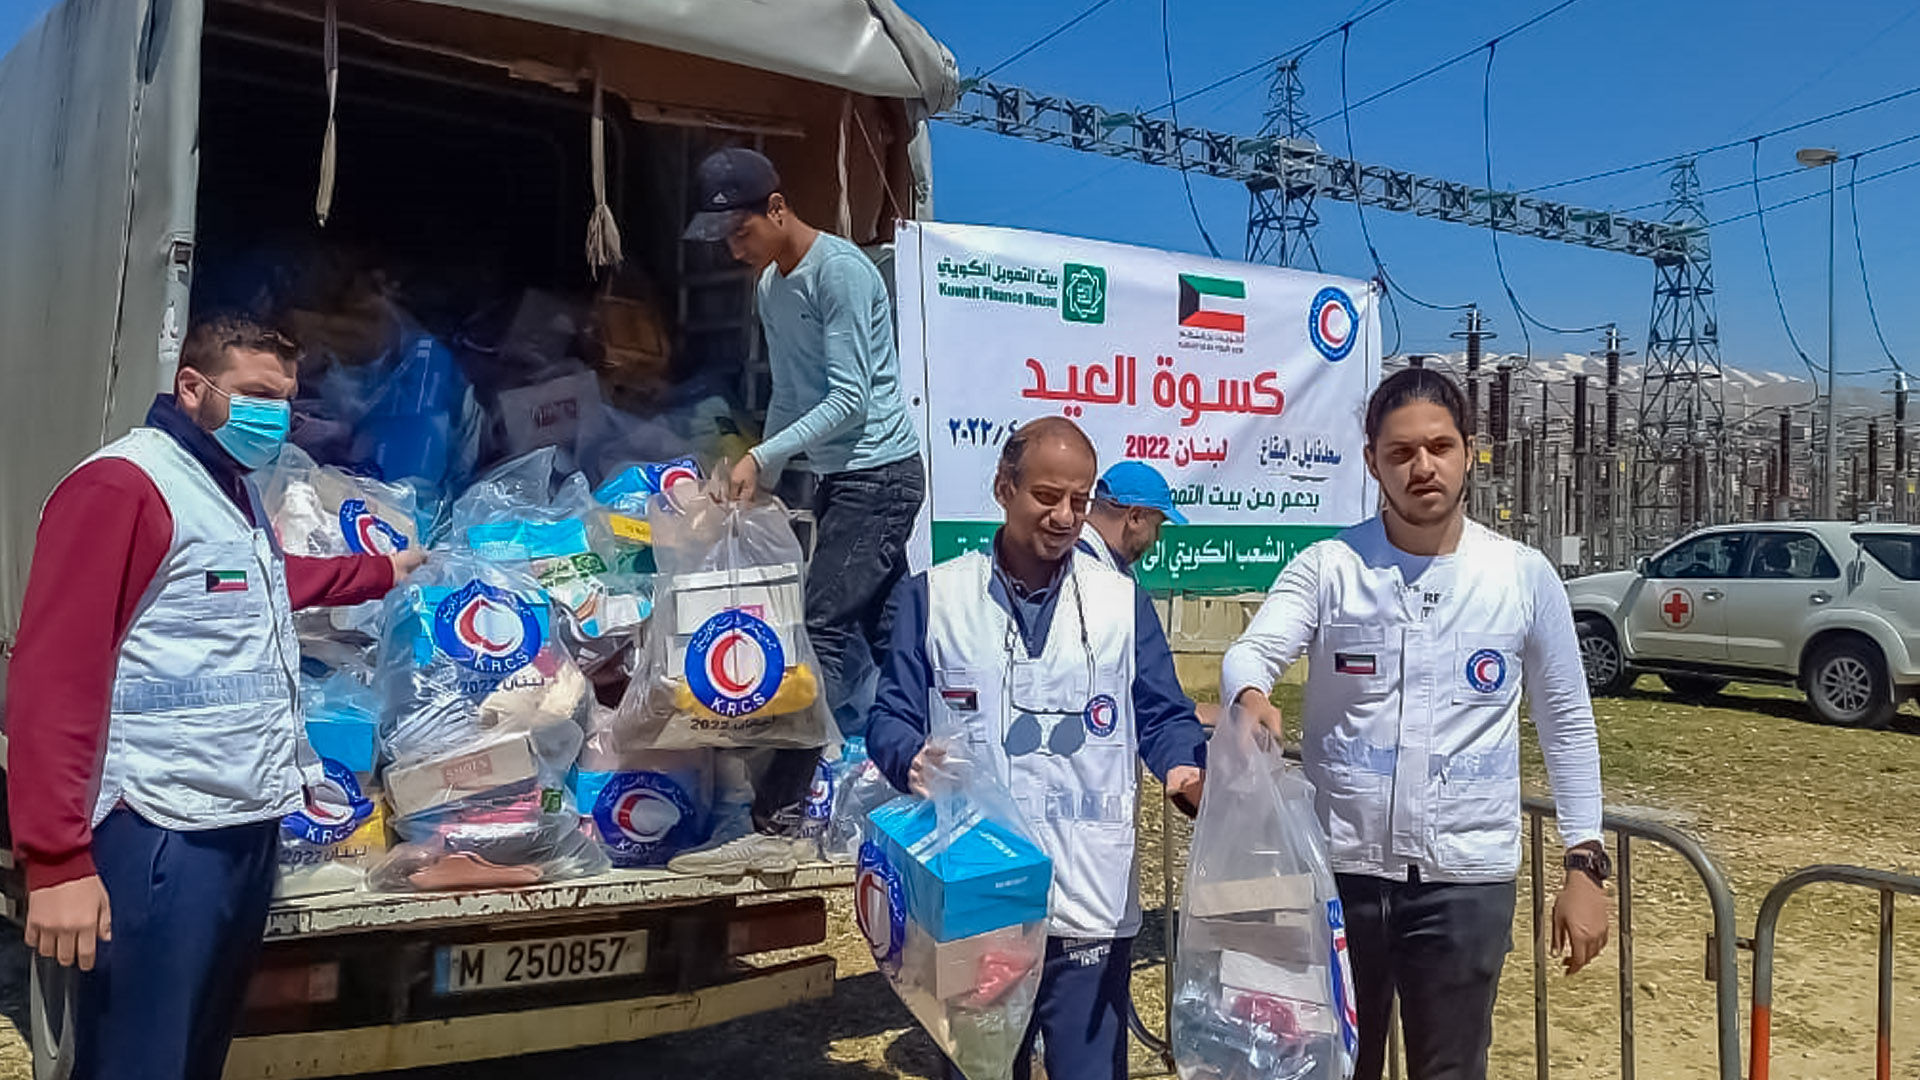 Kuwait supports thousands of needy families in Lebanon